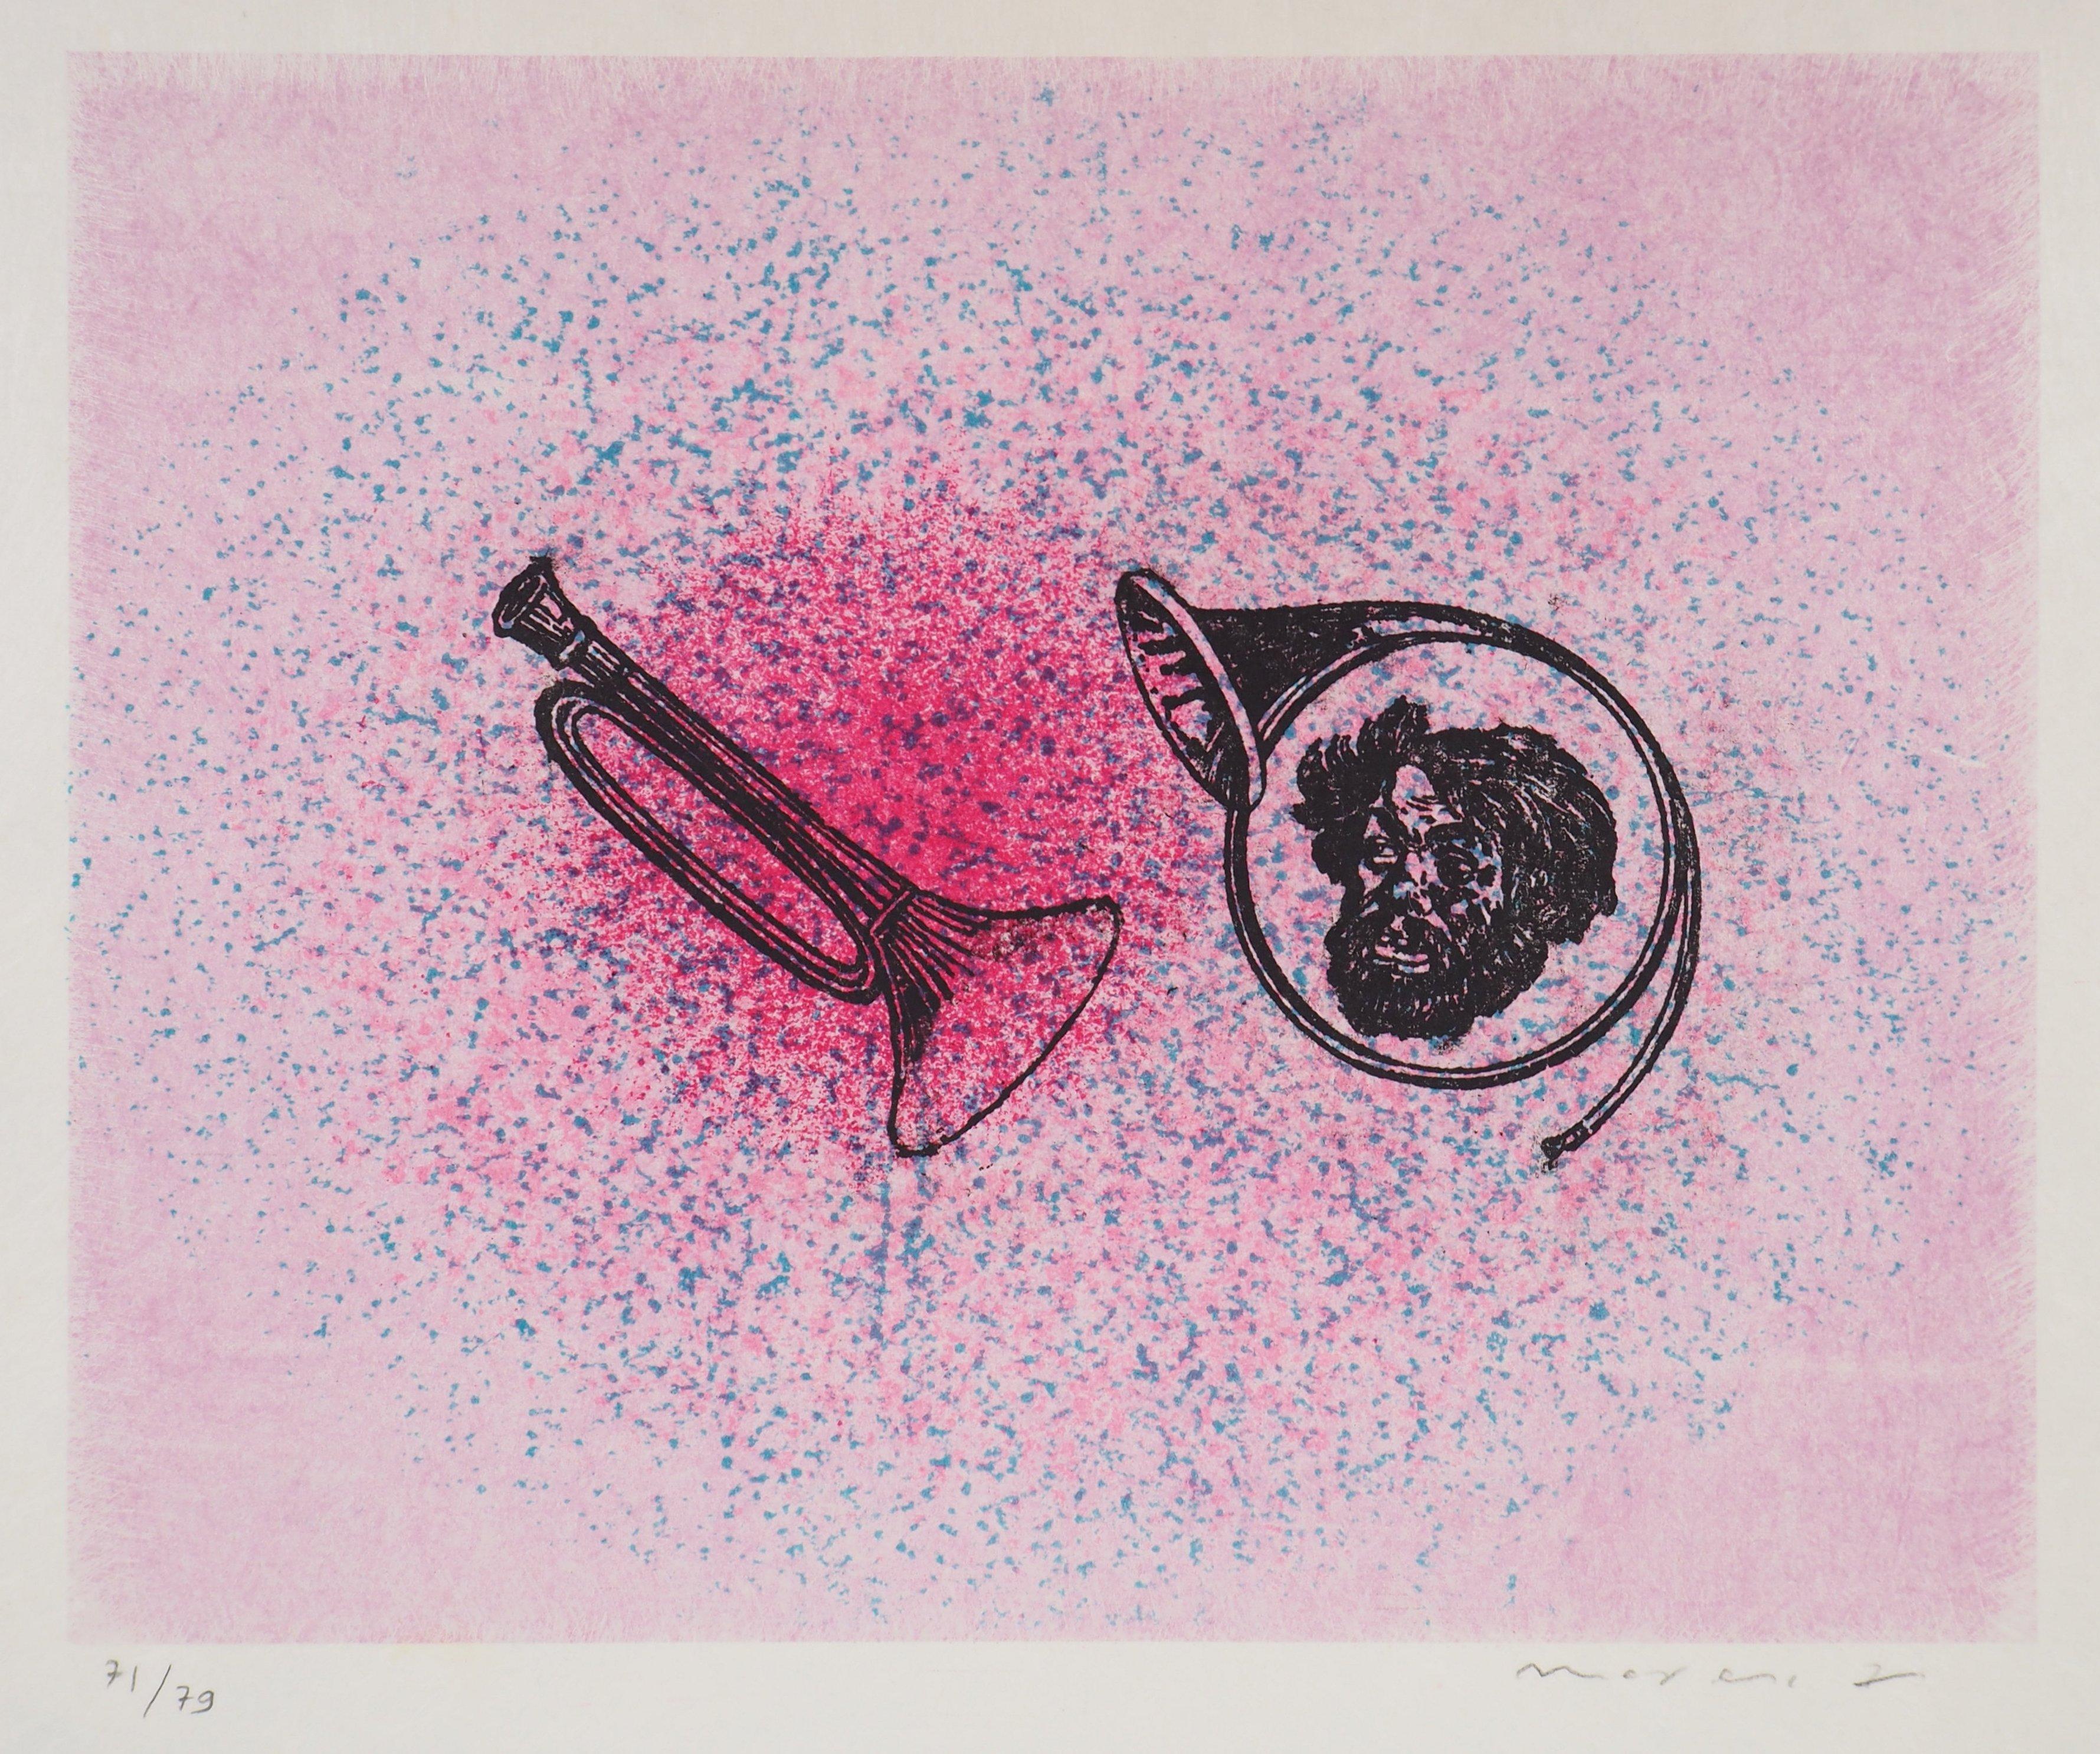 Max Ernst Abstract Print - Pink Melody - Original Lithograph Handsigned & limited 79 copies - Mourlot 1972